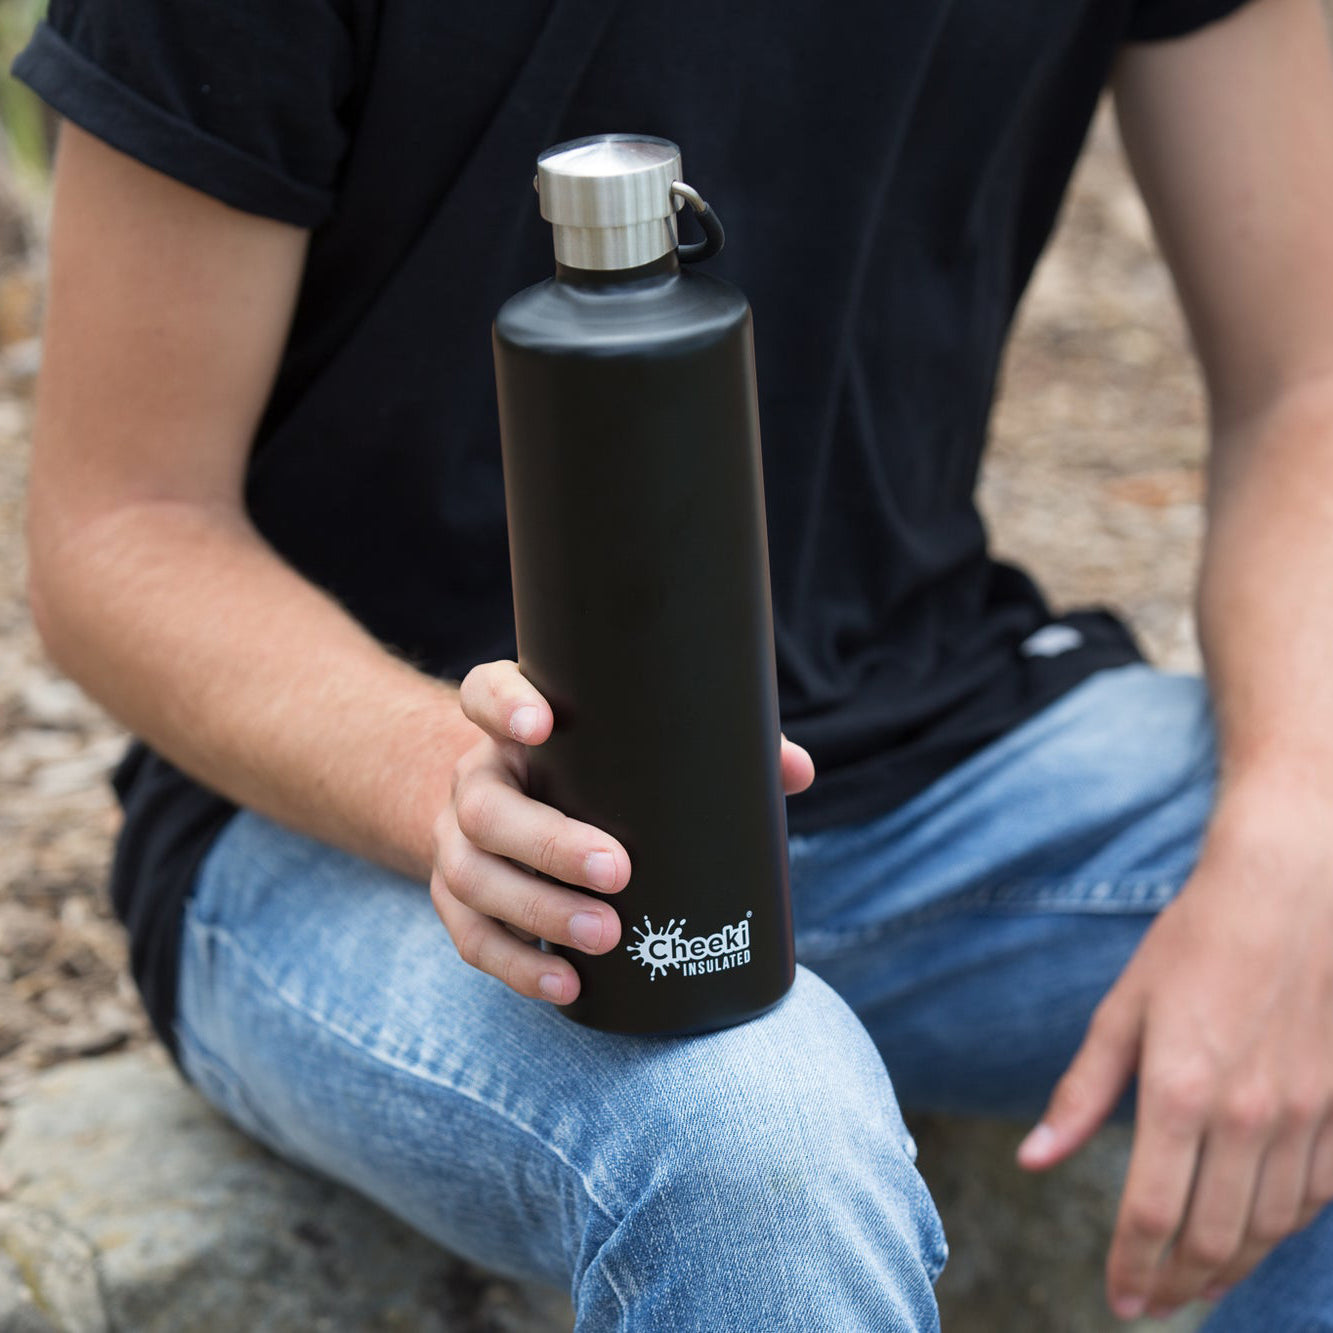 Cheeki Stainless Steel Bottle Insulated - 1L-The Living Co.